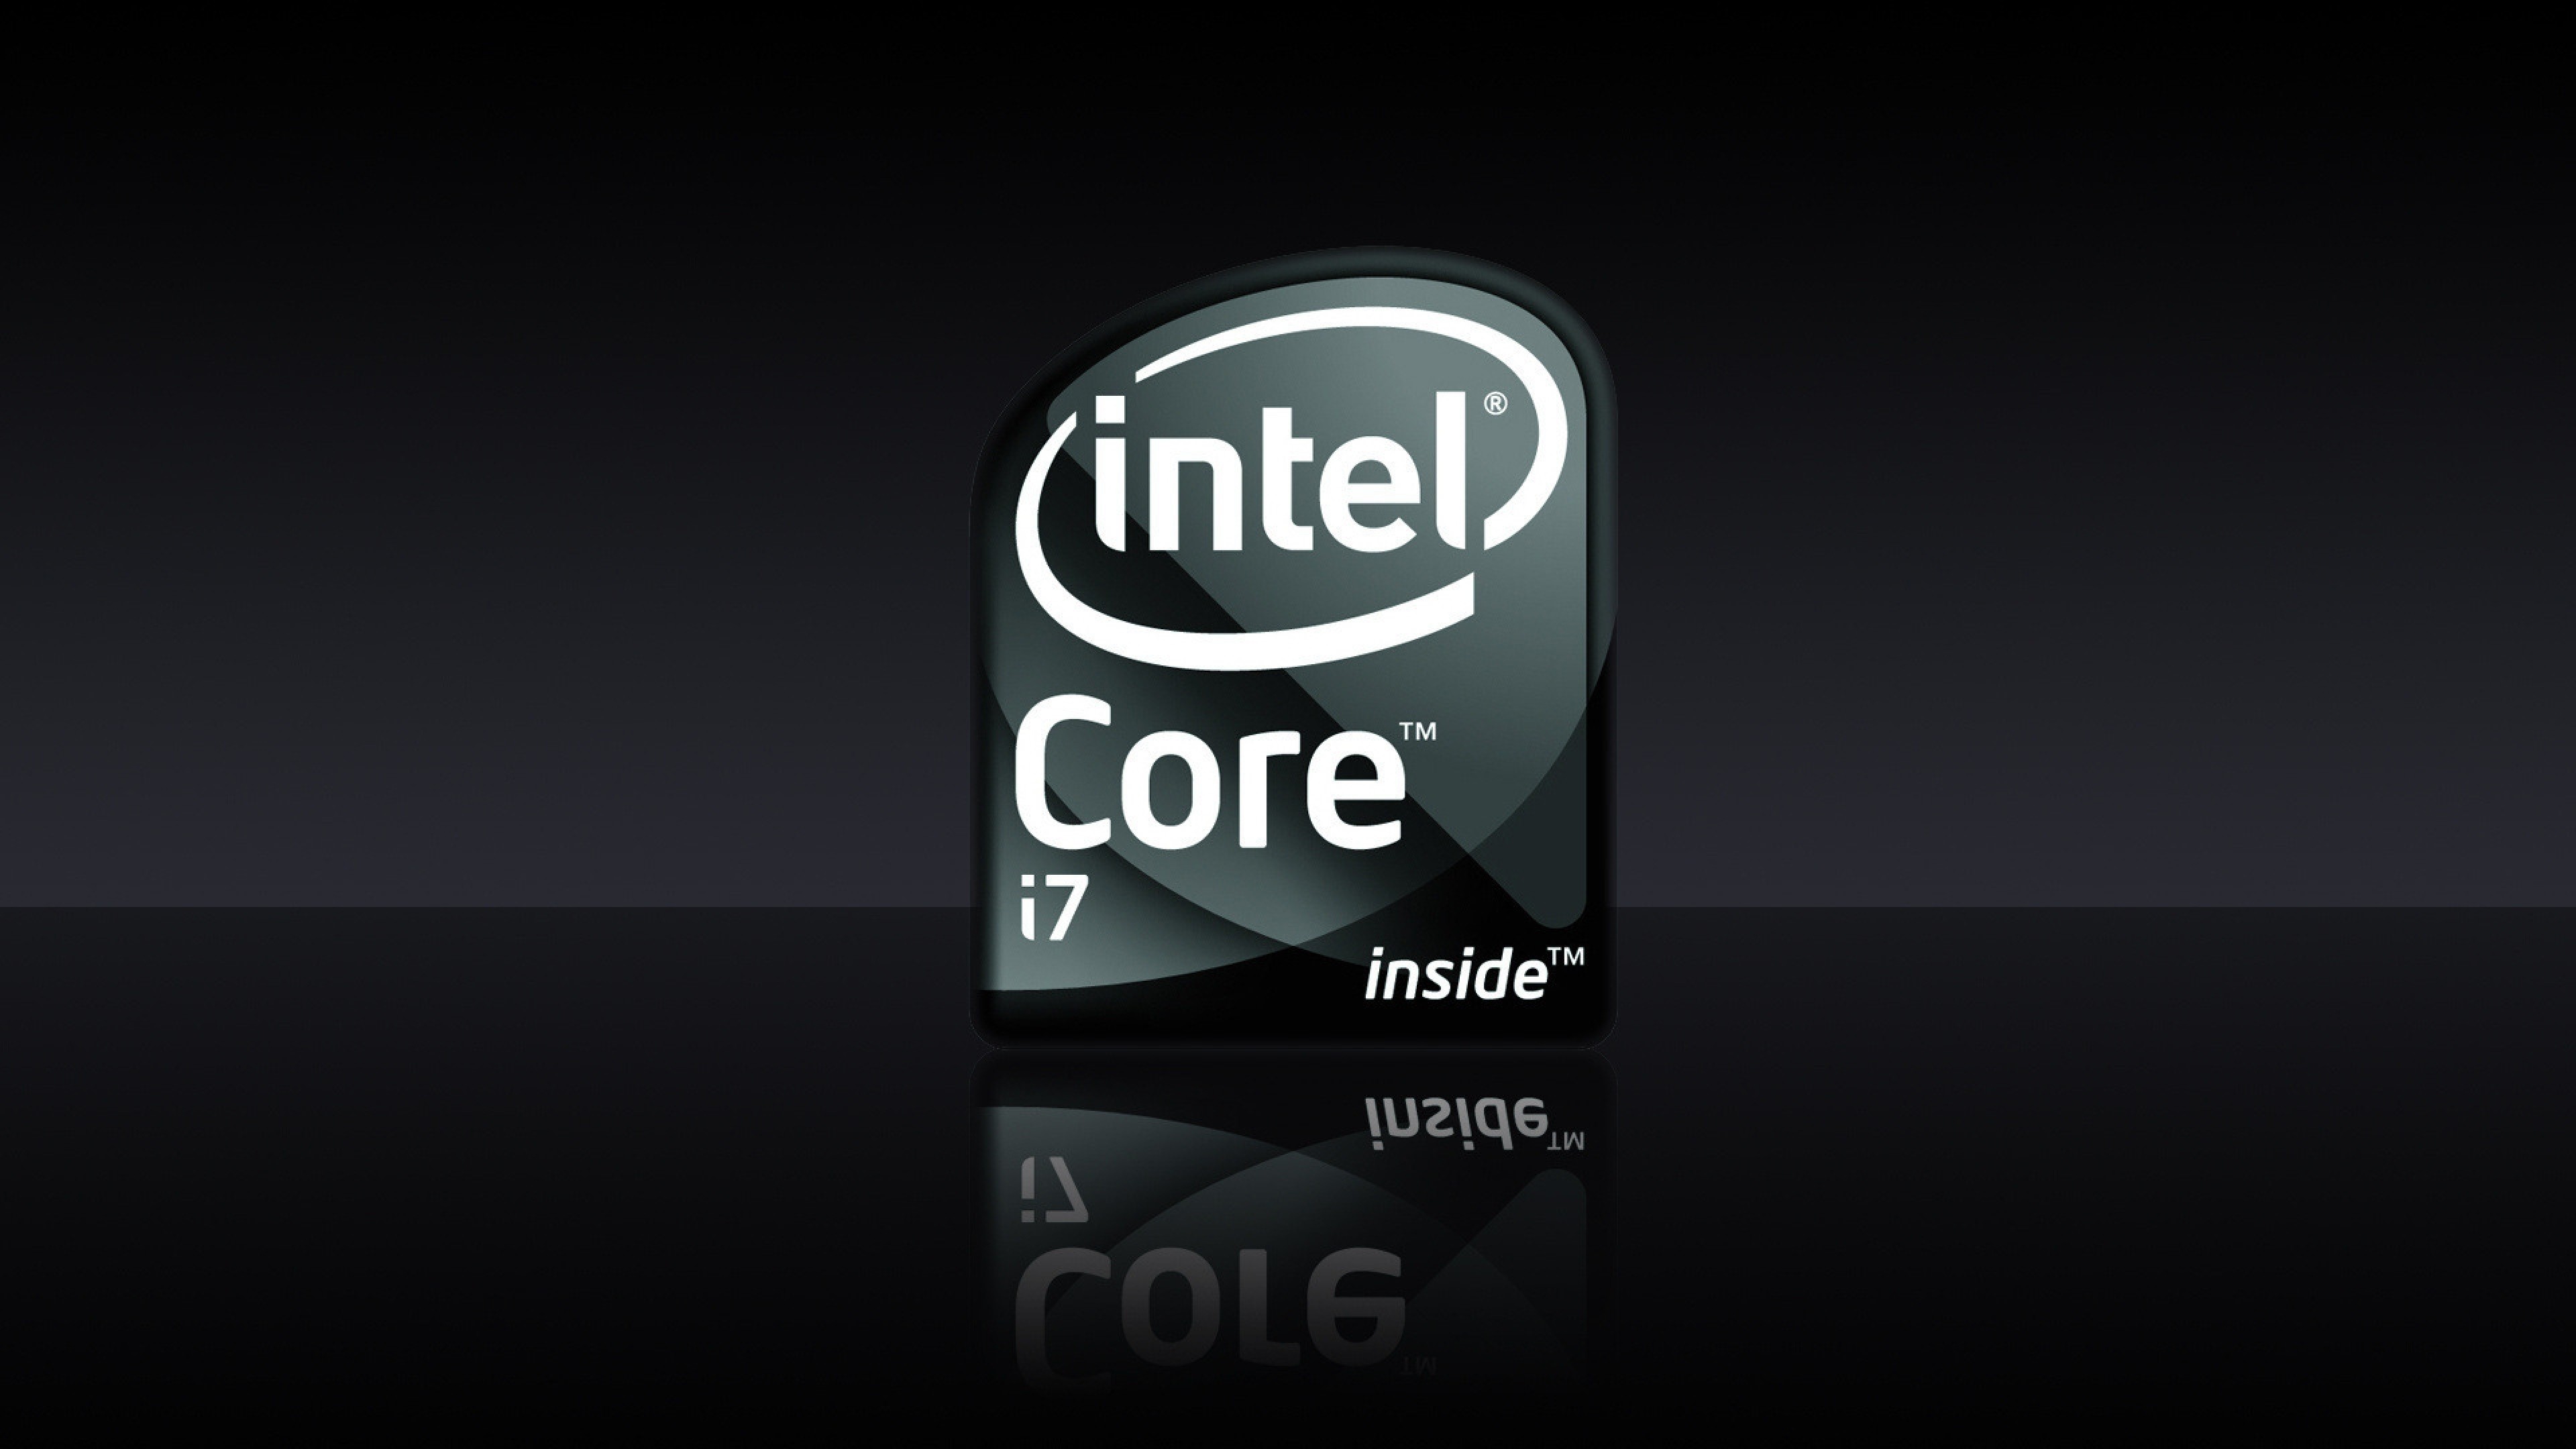 3840x2160 wallpaper.wiki-CPU-Intel-Pictures-PIC-WPB001092